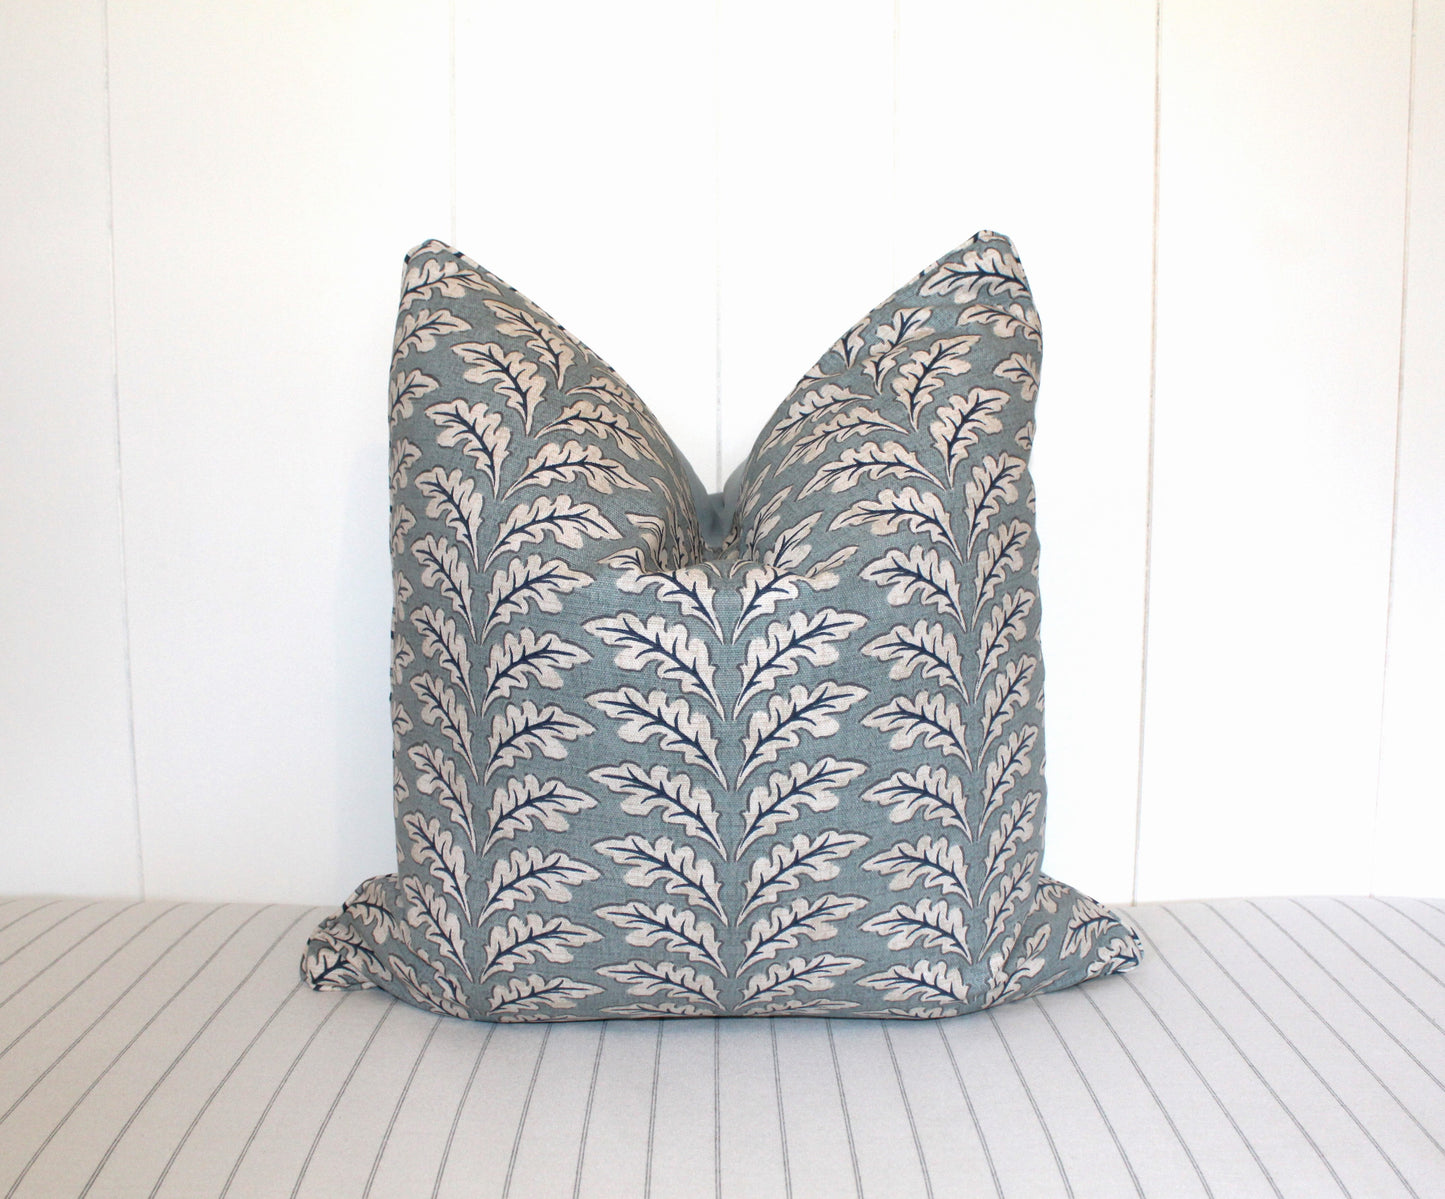 Woodcote Toned down dusty baby blue Cushion covers